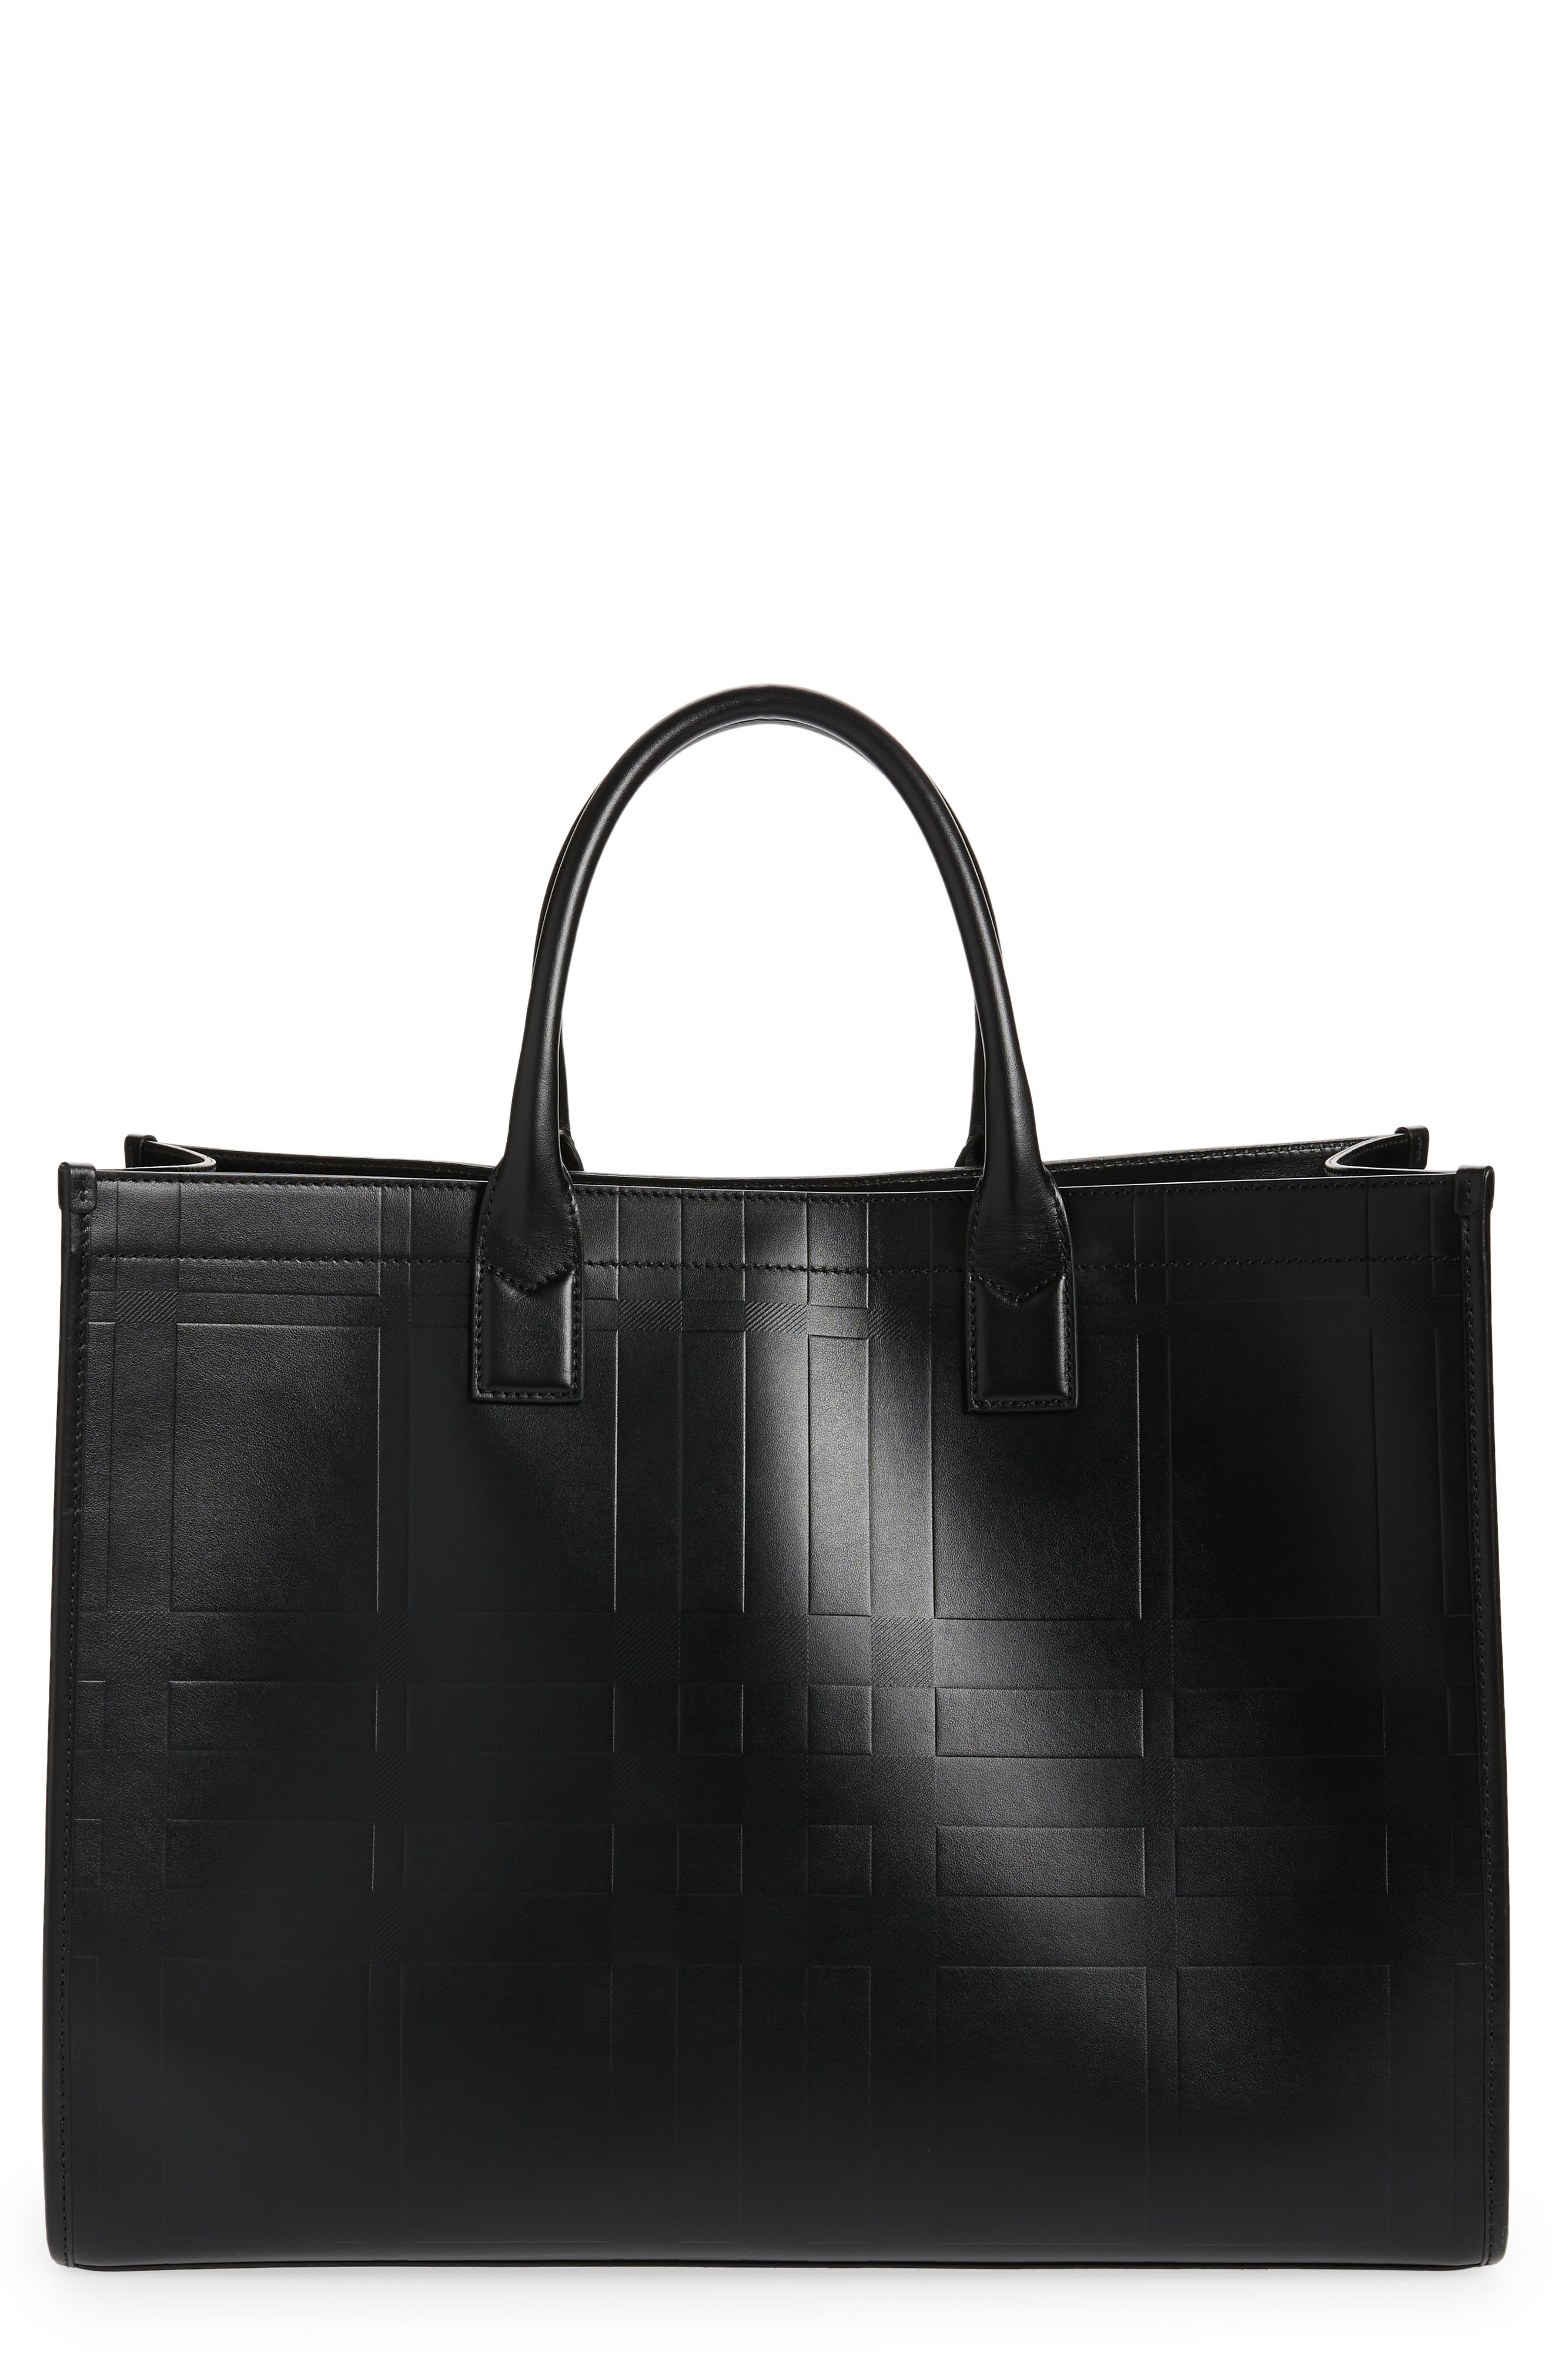 Burberry Denny Embossed Check Leather Tote in Black at Nordstrom